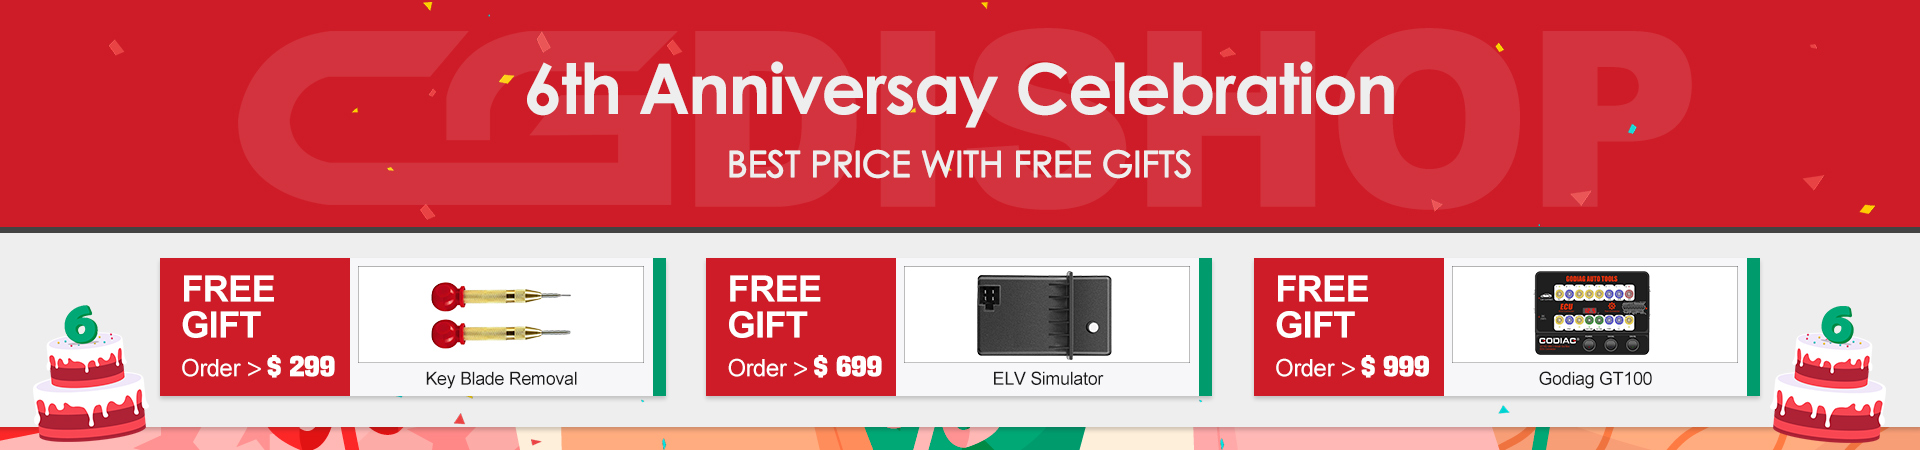 6th Anniversary Sale Best Price with Free Gifts